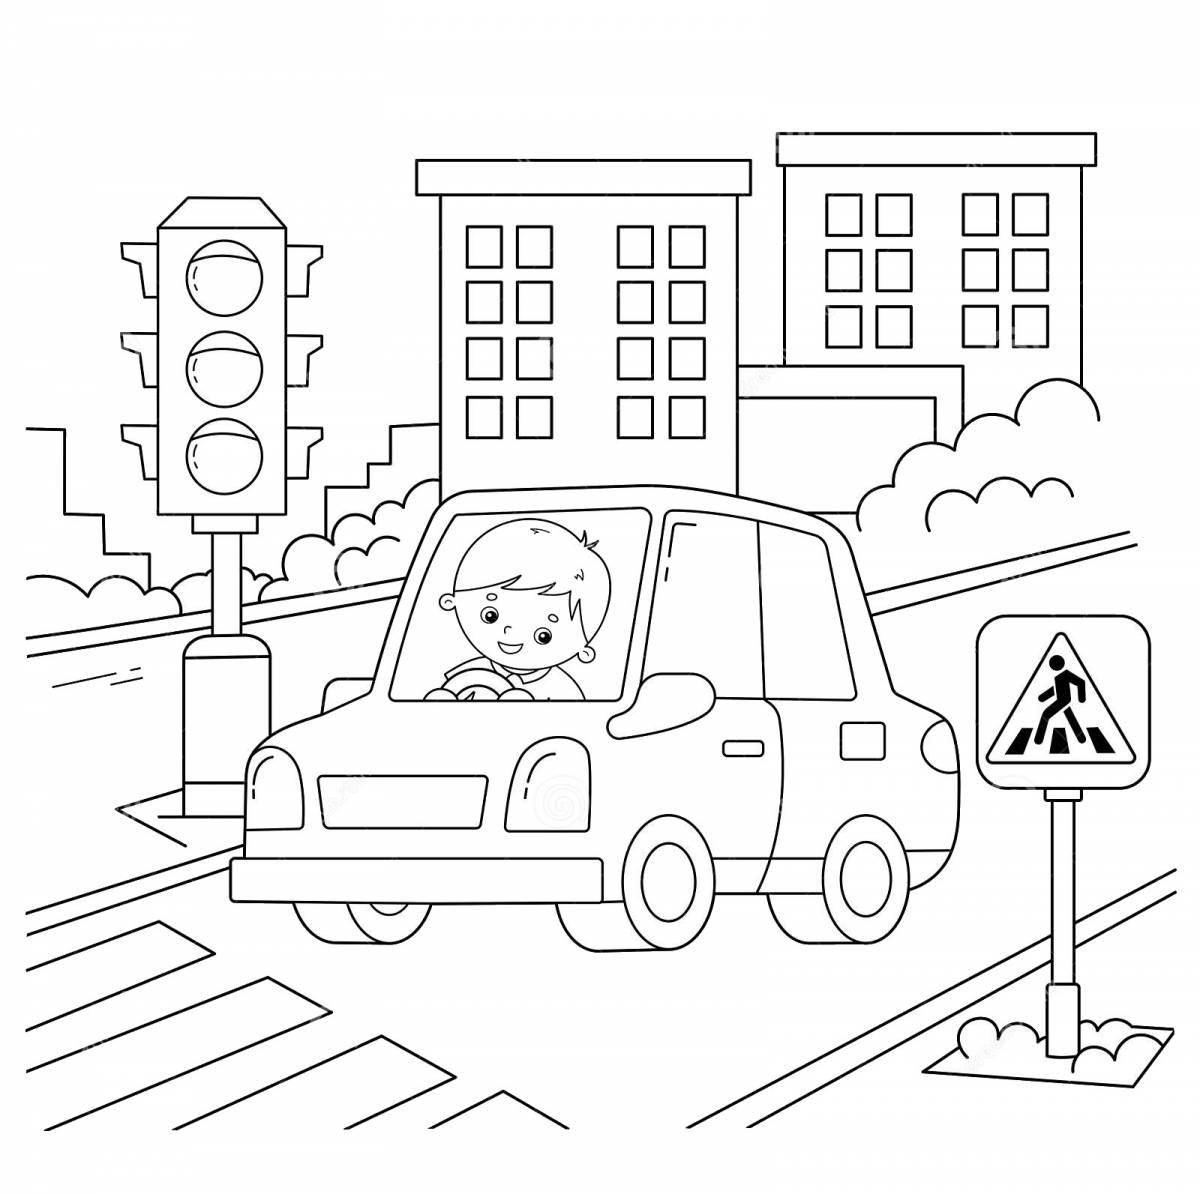 Colorful crossroads coloring page